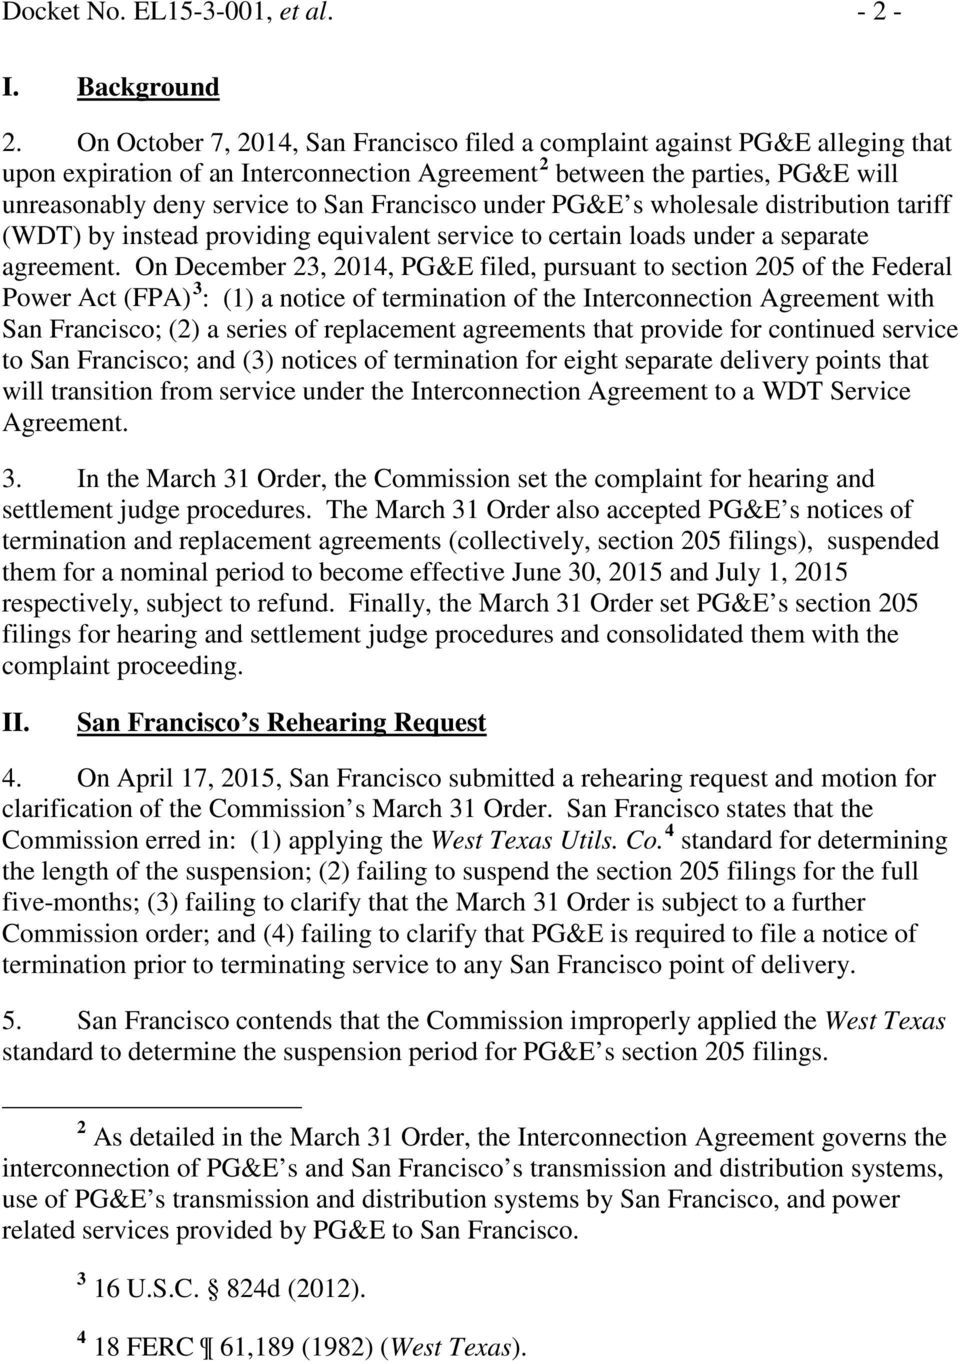 Francisco under PG&E s wholesale distribution tariff (WDT) by instead providing equivalent service to certain loads under a separate agreement.